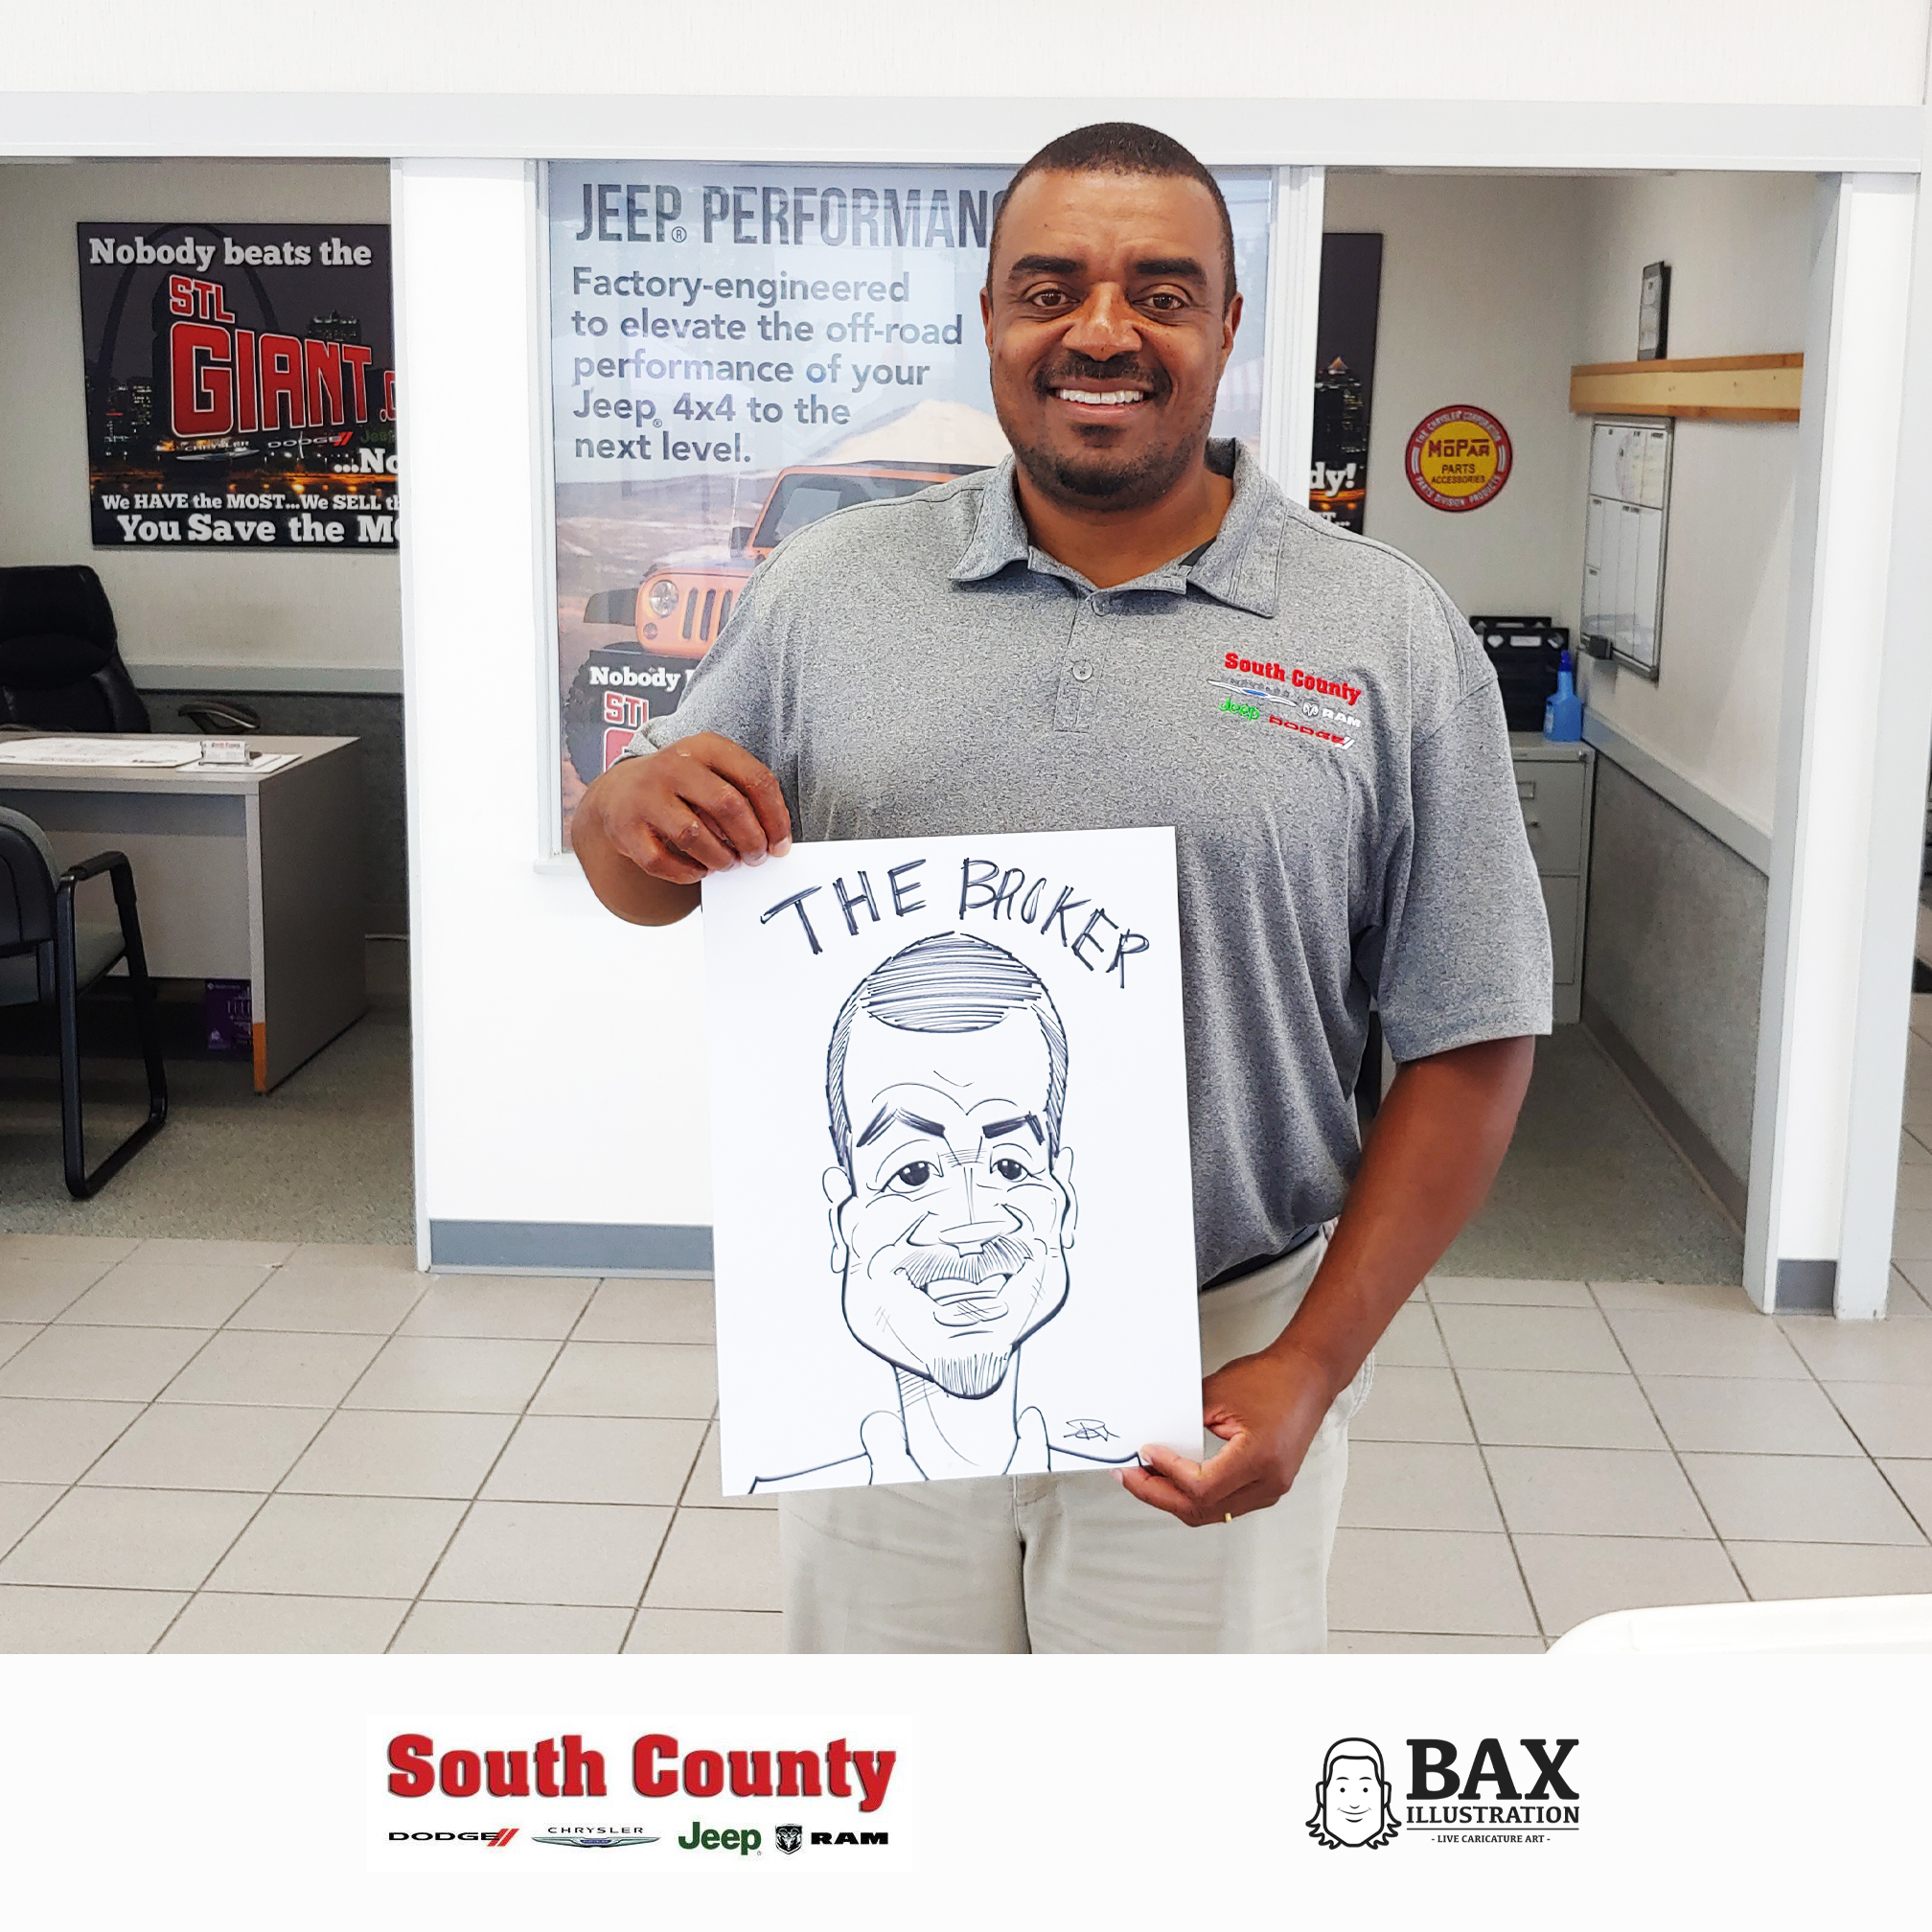 Guy holding caricature by Bax Illustration at South County Dodge Customer Appreciation Event in St. Louis